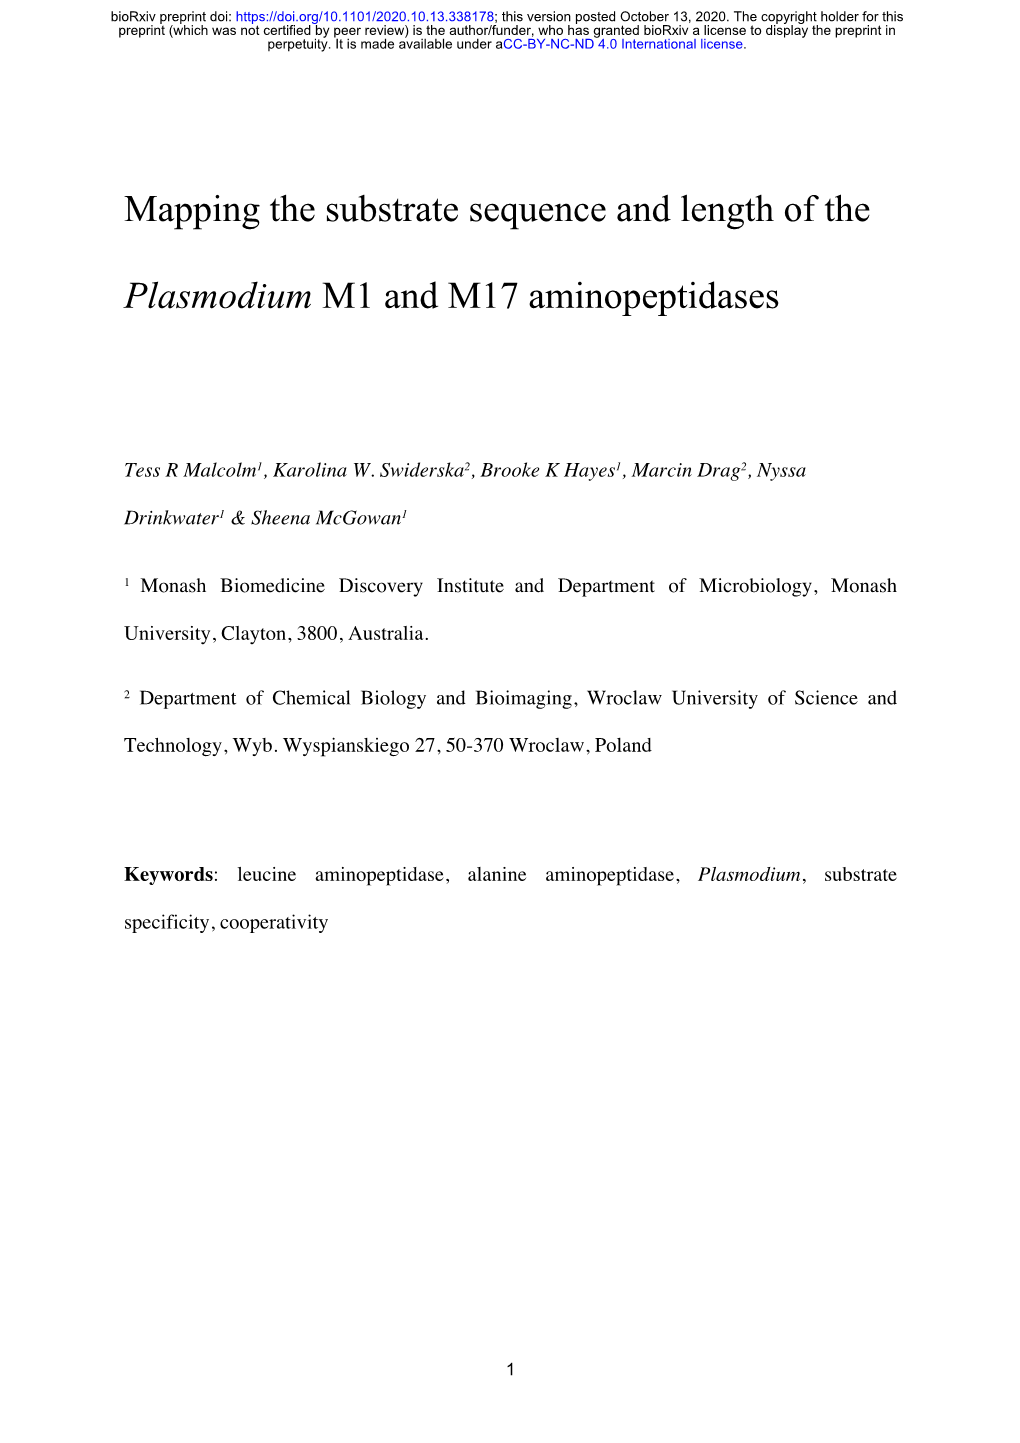 Mapping the Substrate Sequence and Length of the Plasmodium M1 And